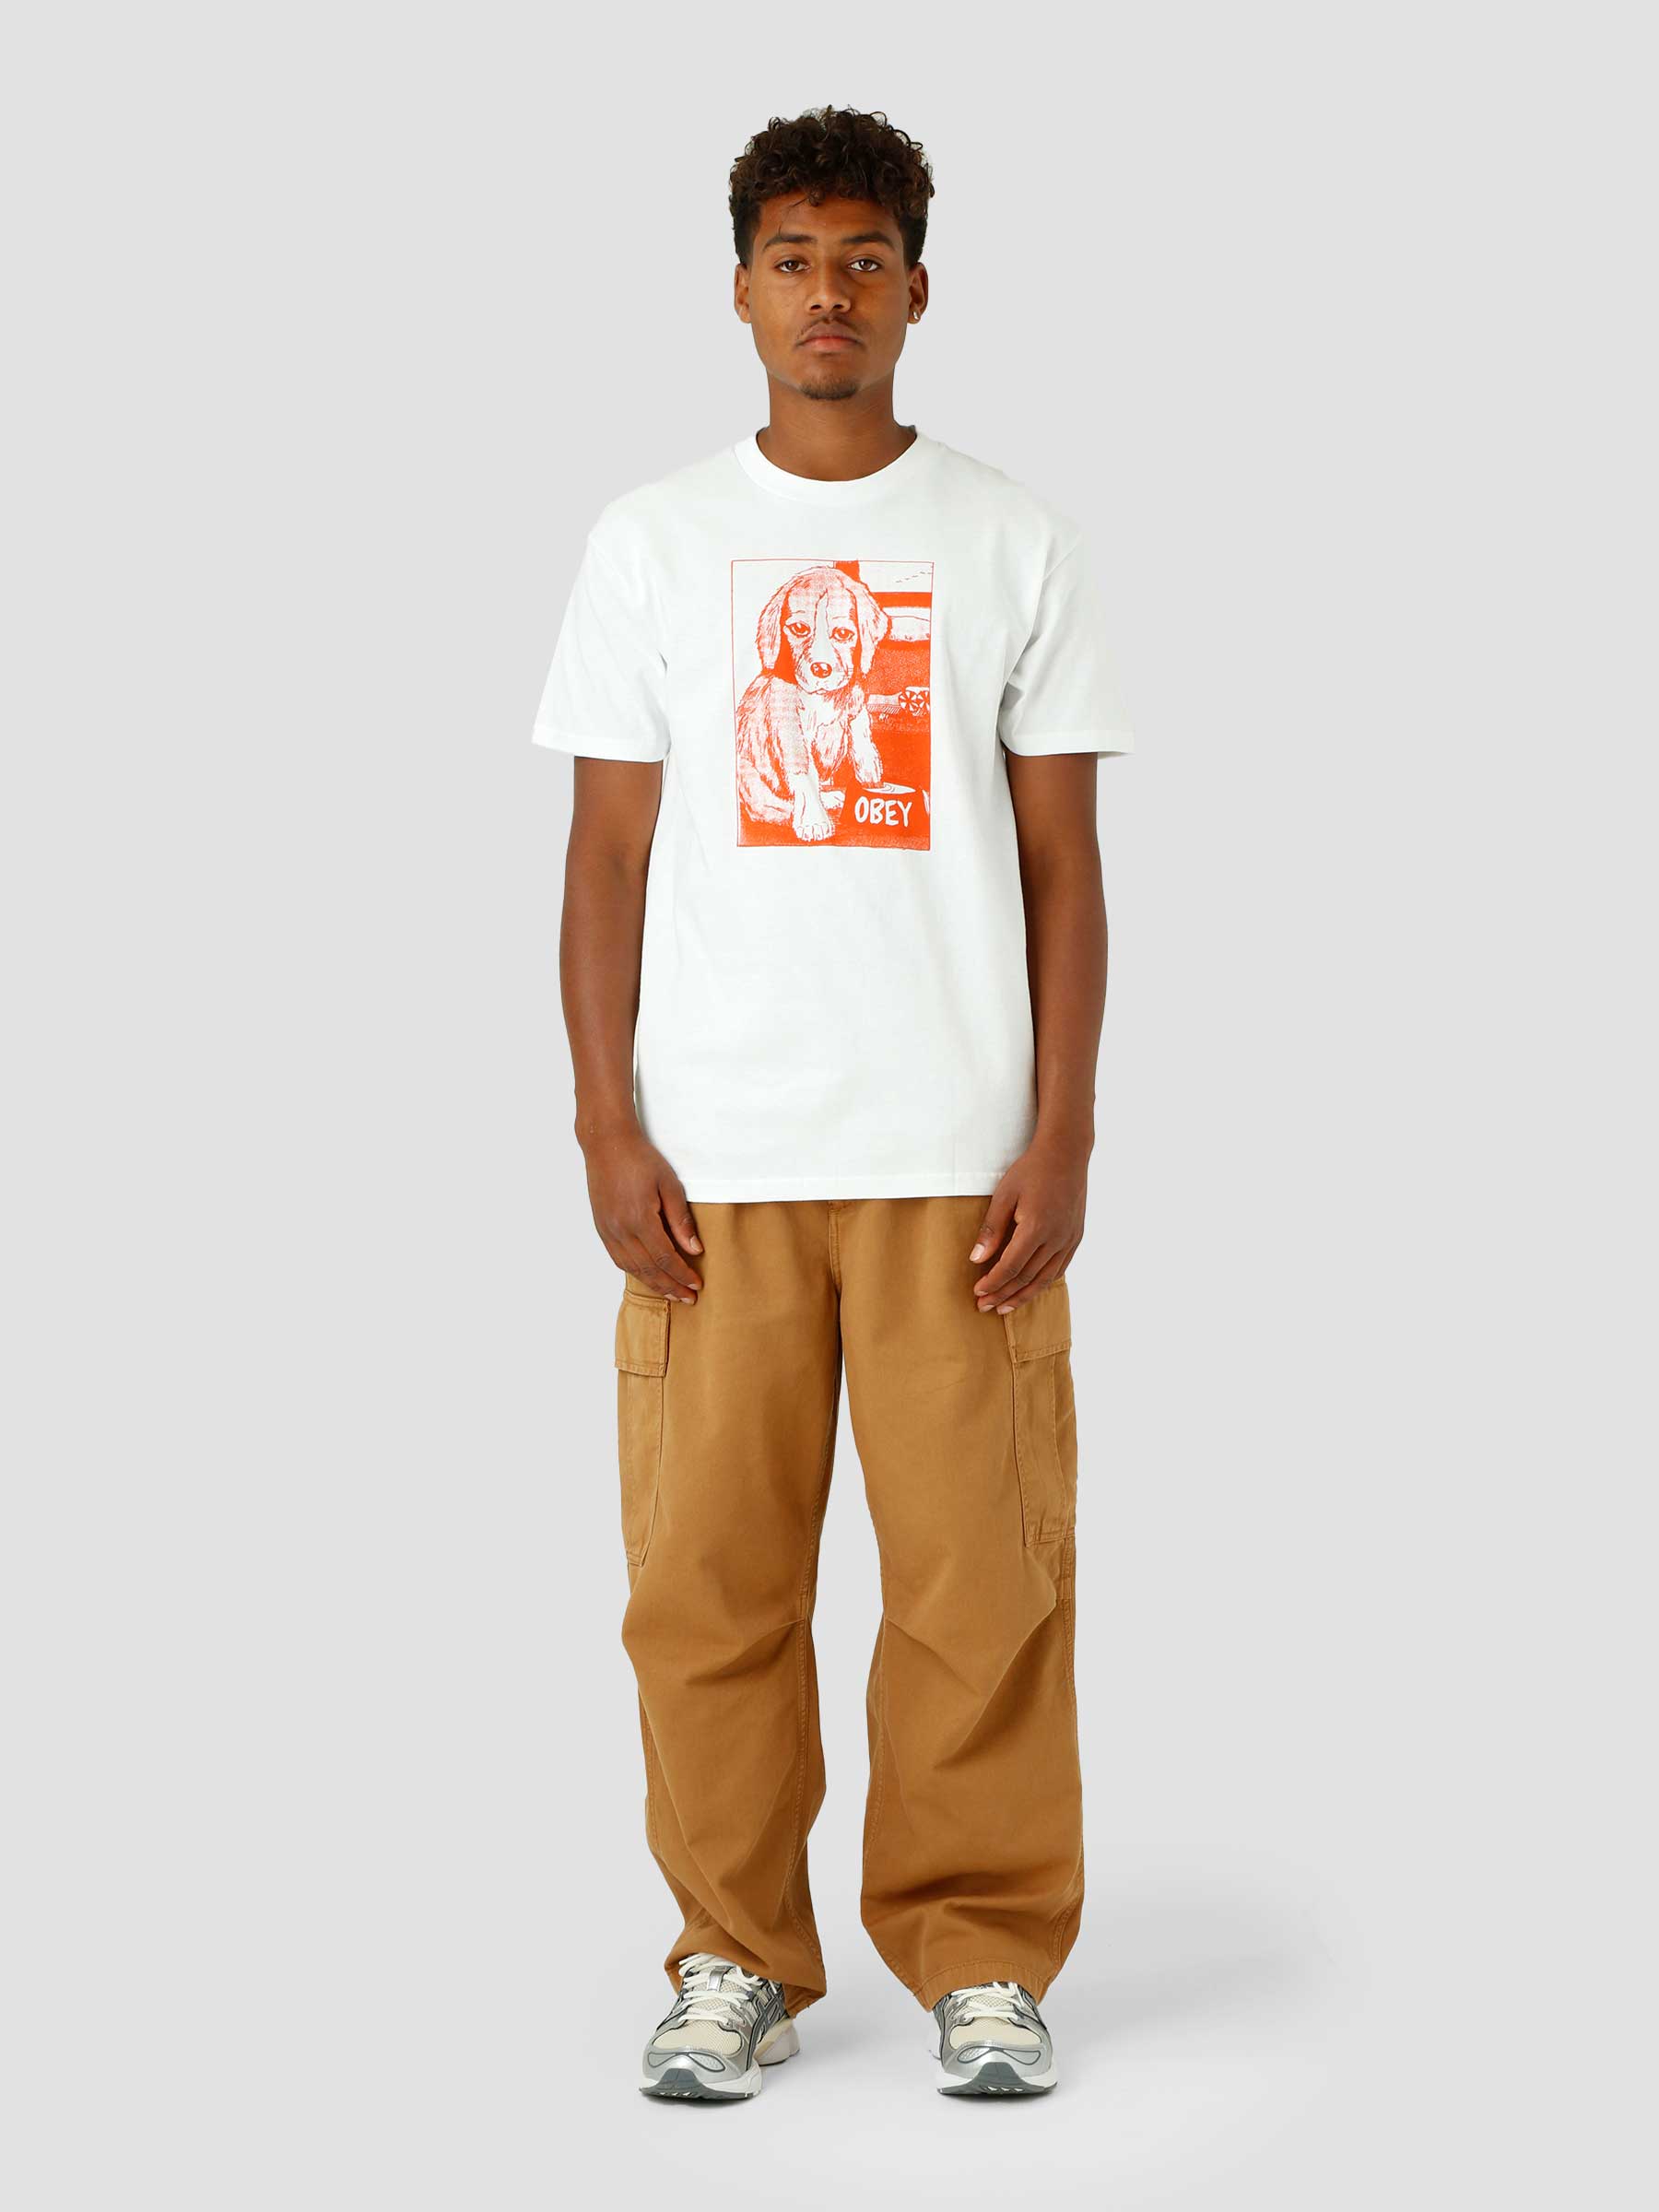 Obey Paws T-shirt White 165263189